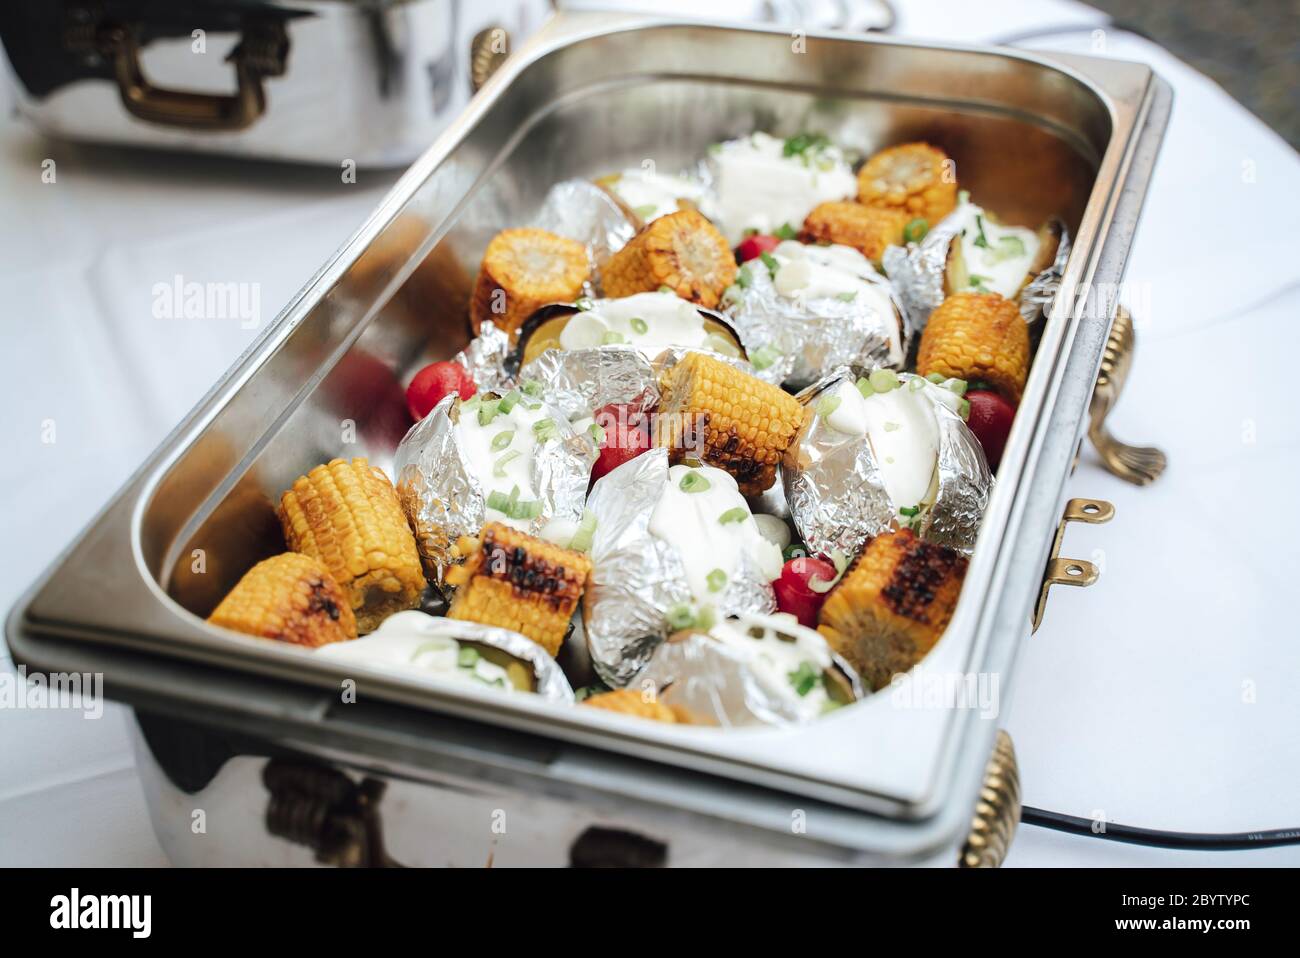 https://c8.alamy.com/comp/2BYTYPC/grilled-corn-and-baked-potatoes-stuffed-with-cheese-in-hotel-pan-on-food-warmer-self-service-buffet-table-celebration-party-birthday-or-wedding-2BYTYPC.jpg